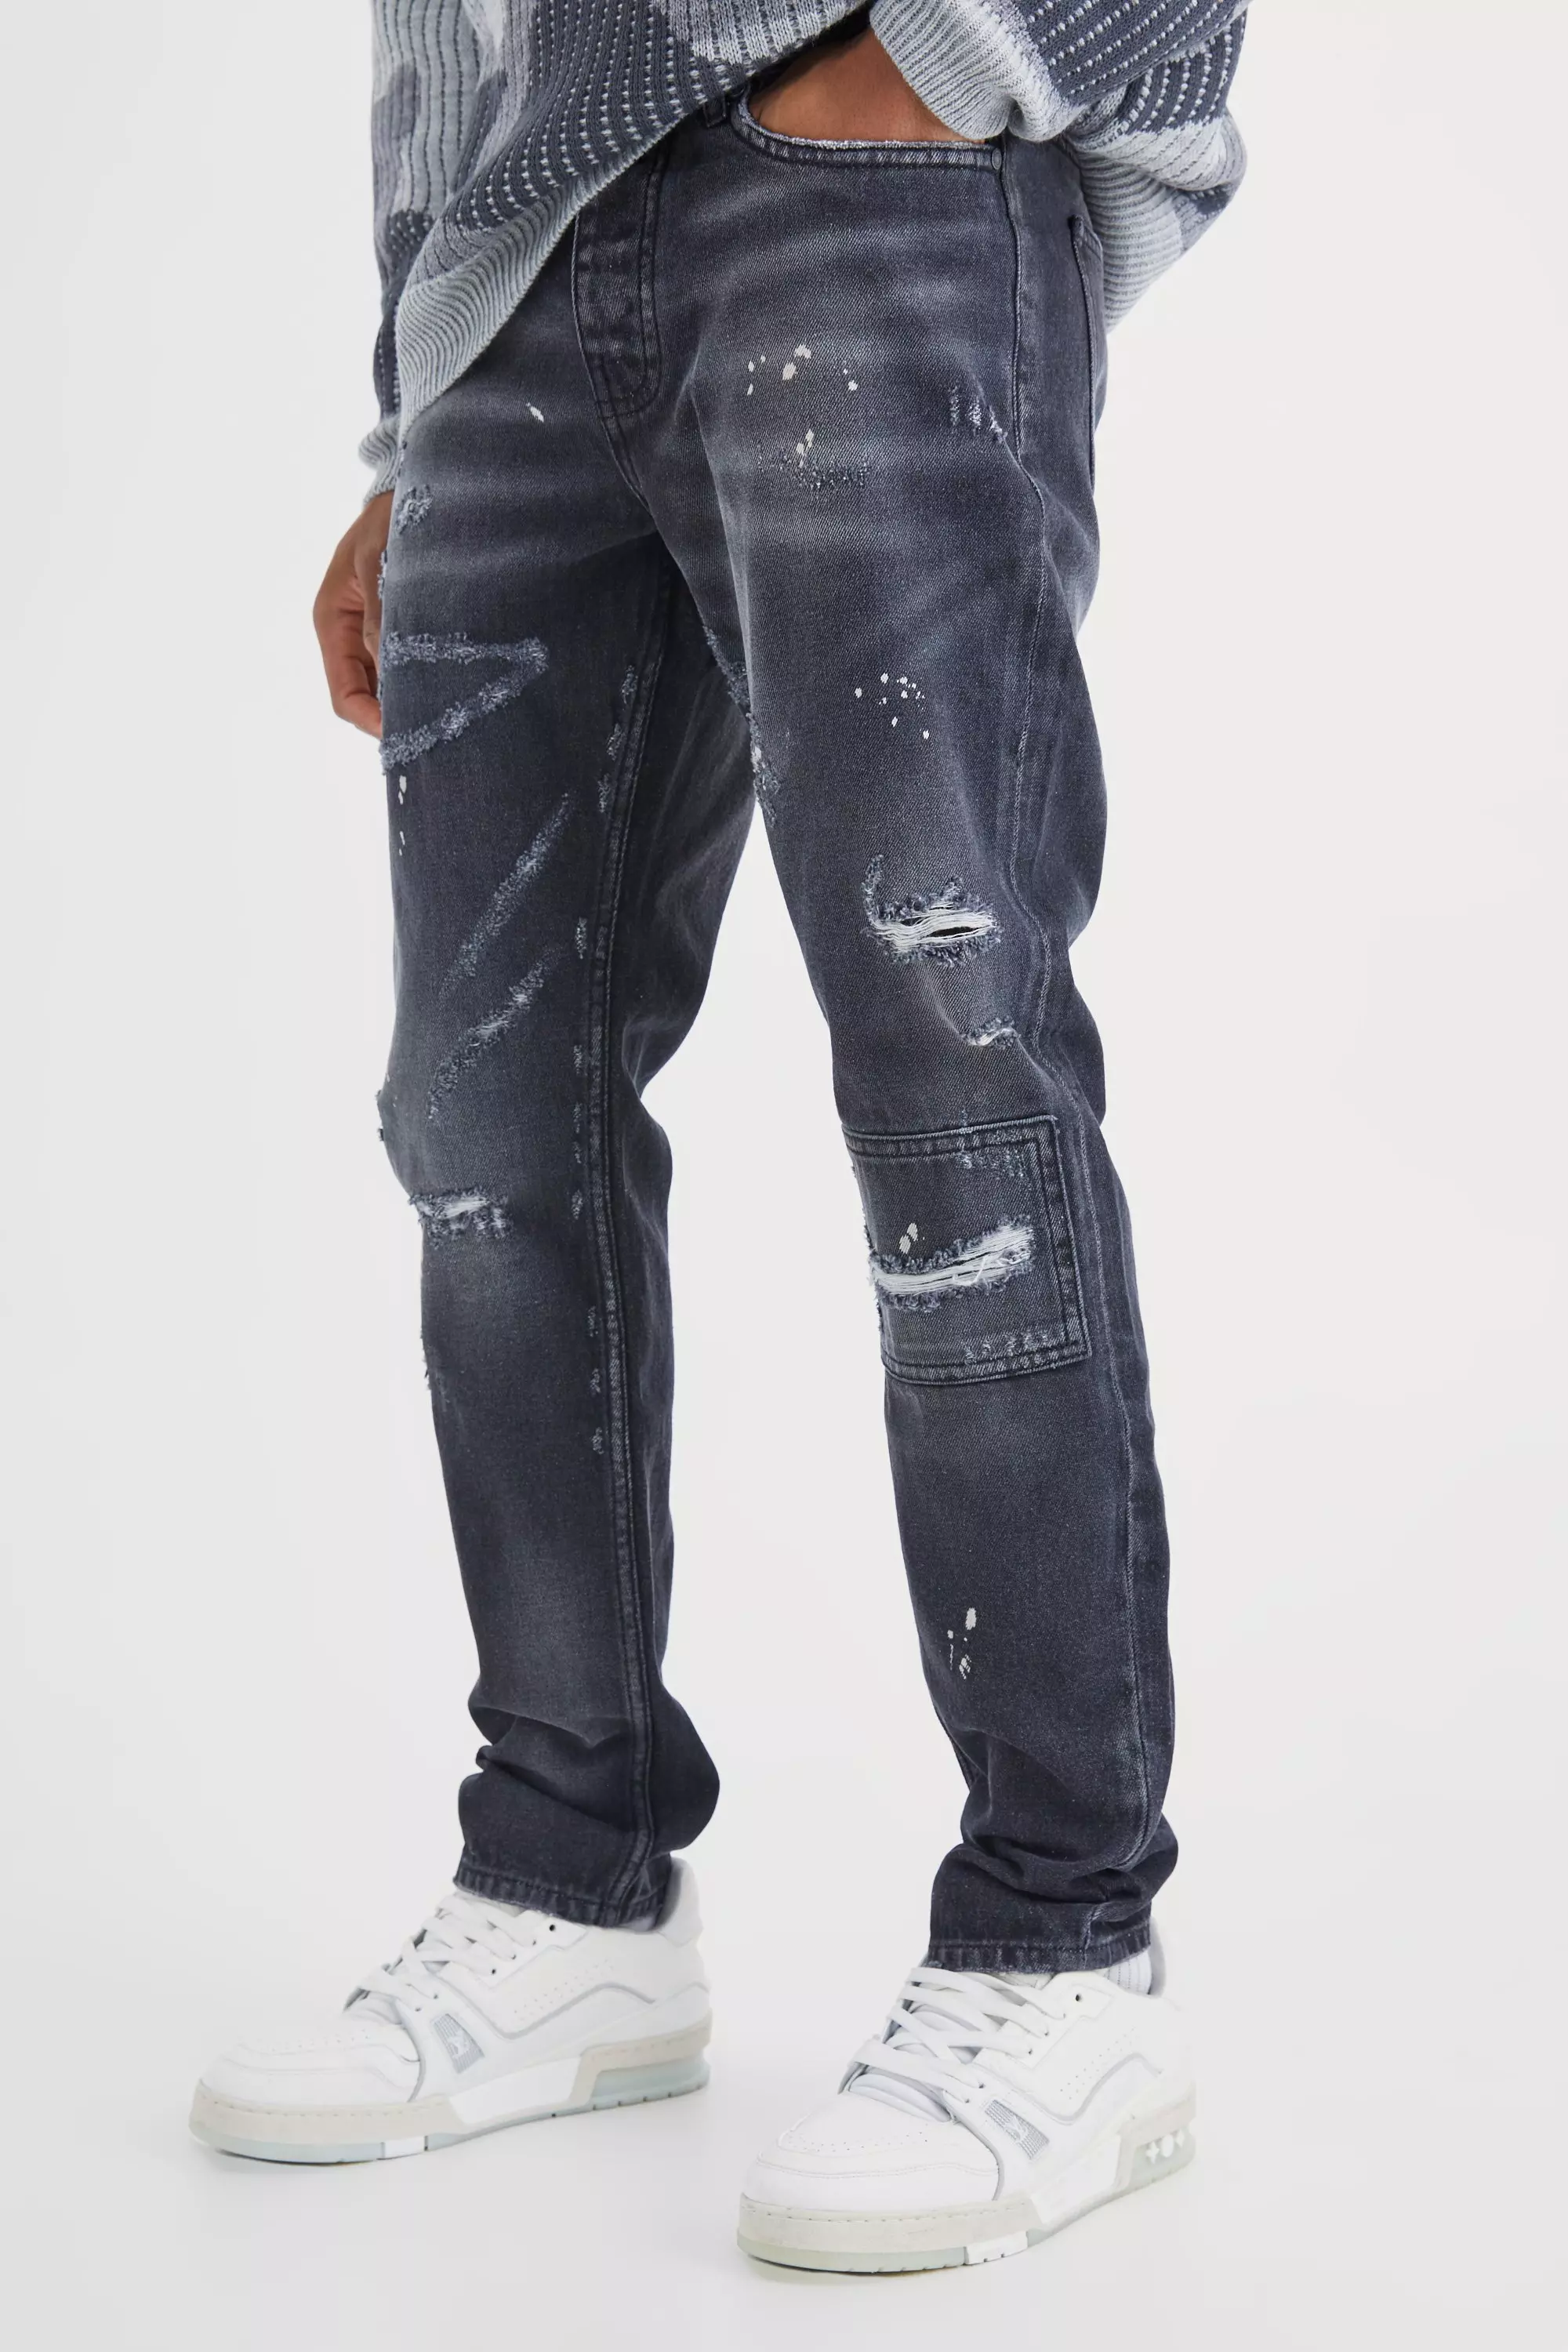 Men Ripped Stretch Skinny Jeans Distressed Frayed Denim Pants Knee Hole  Casual Trousers